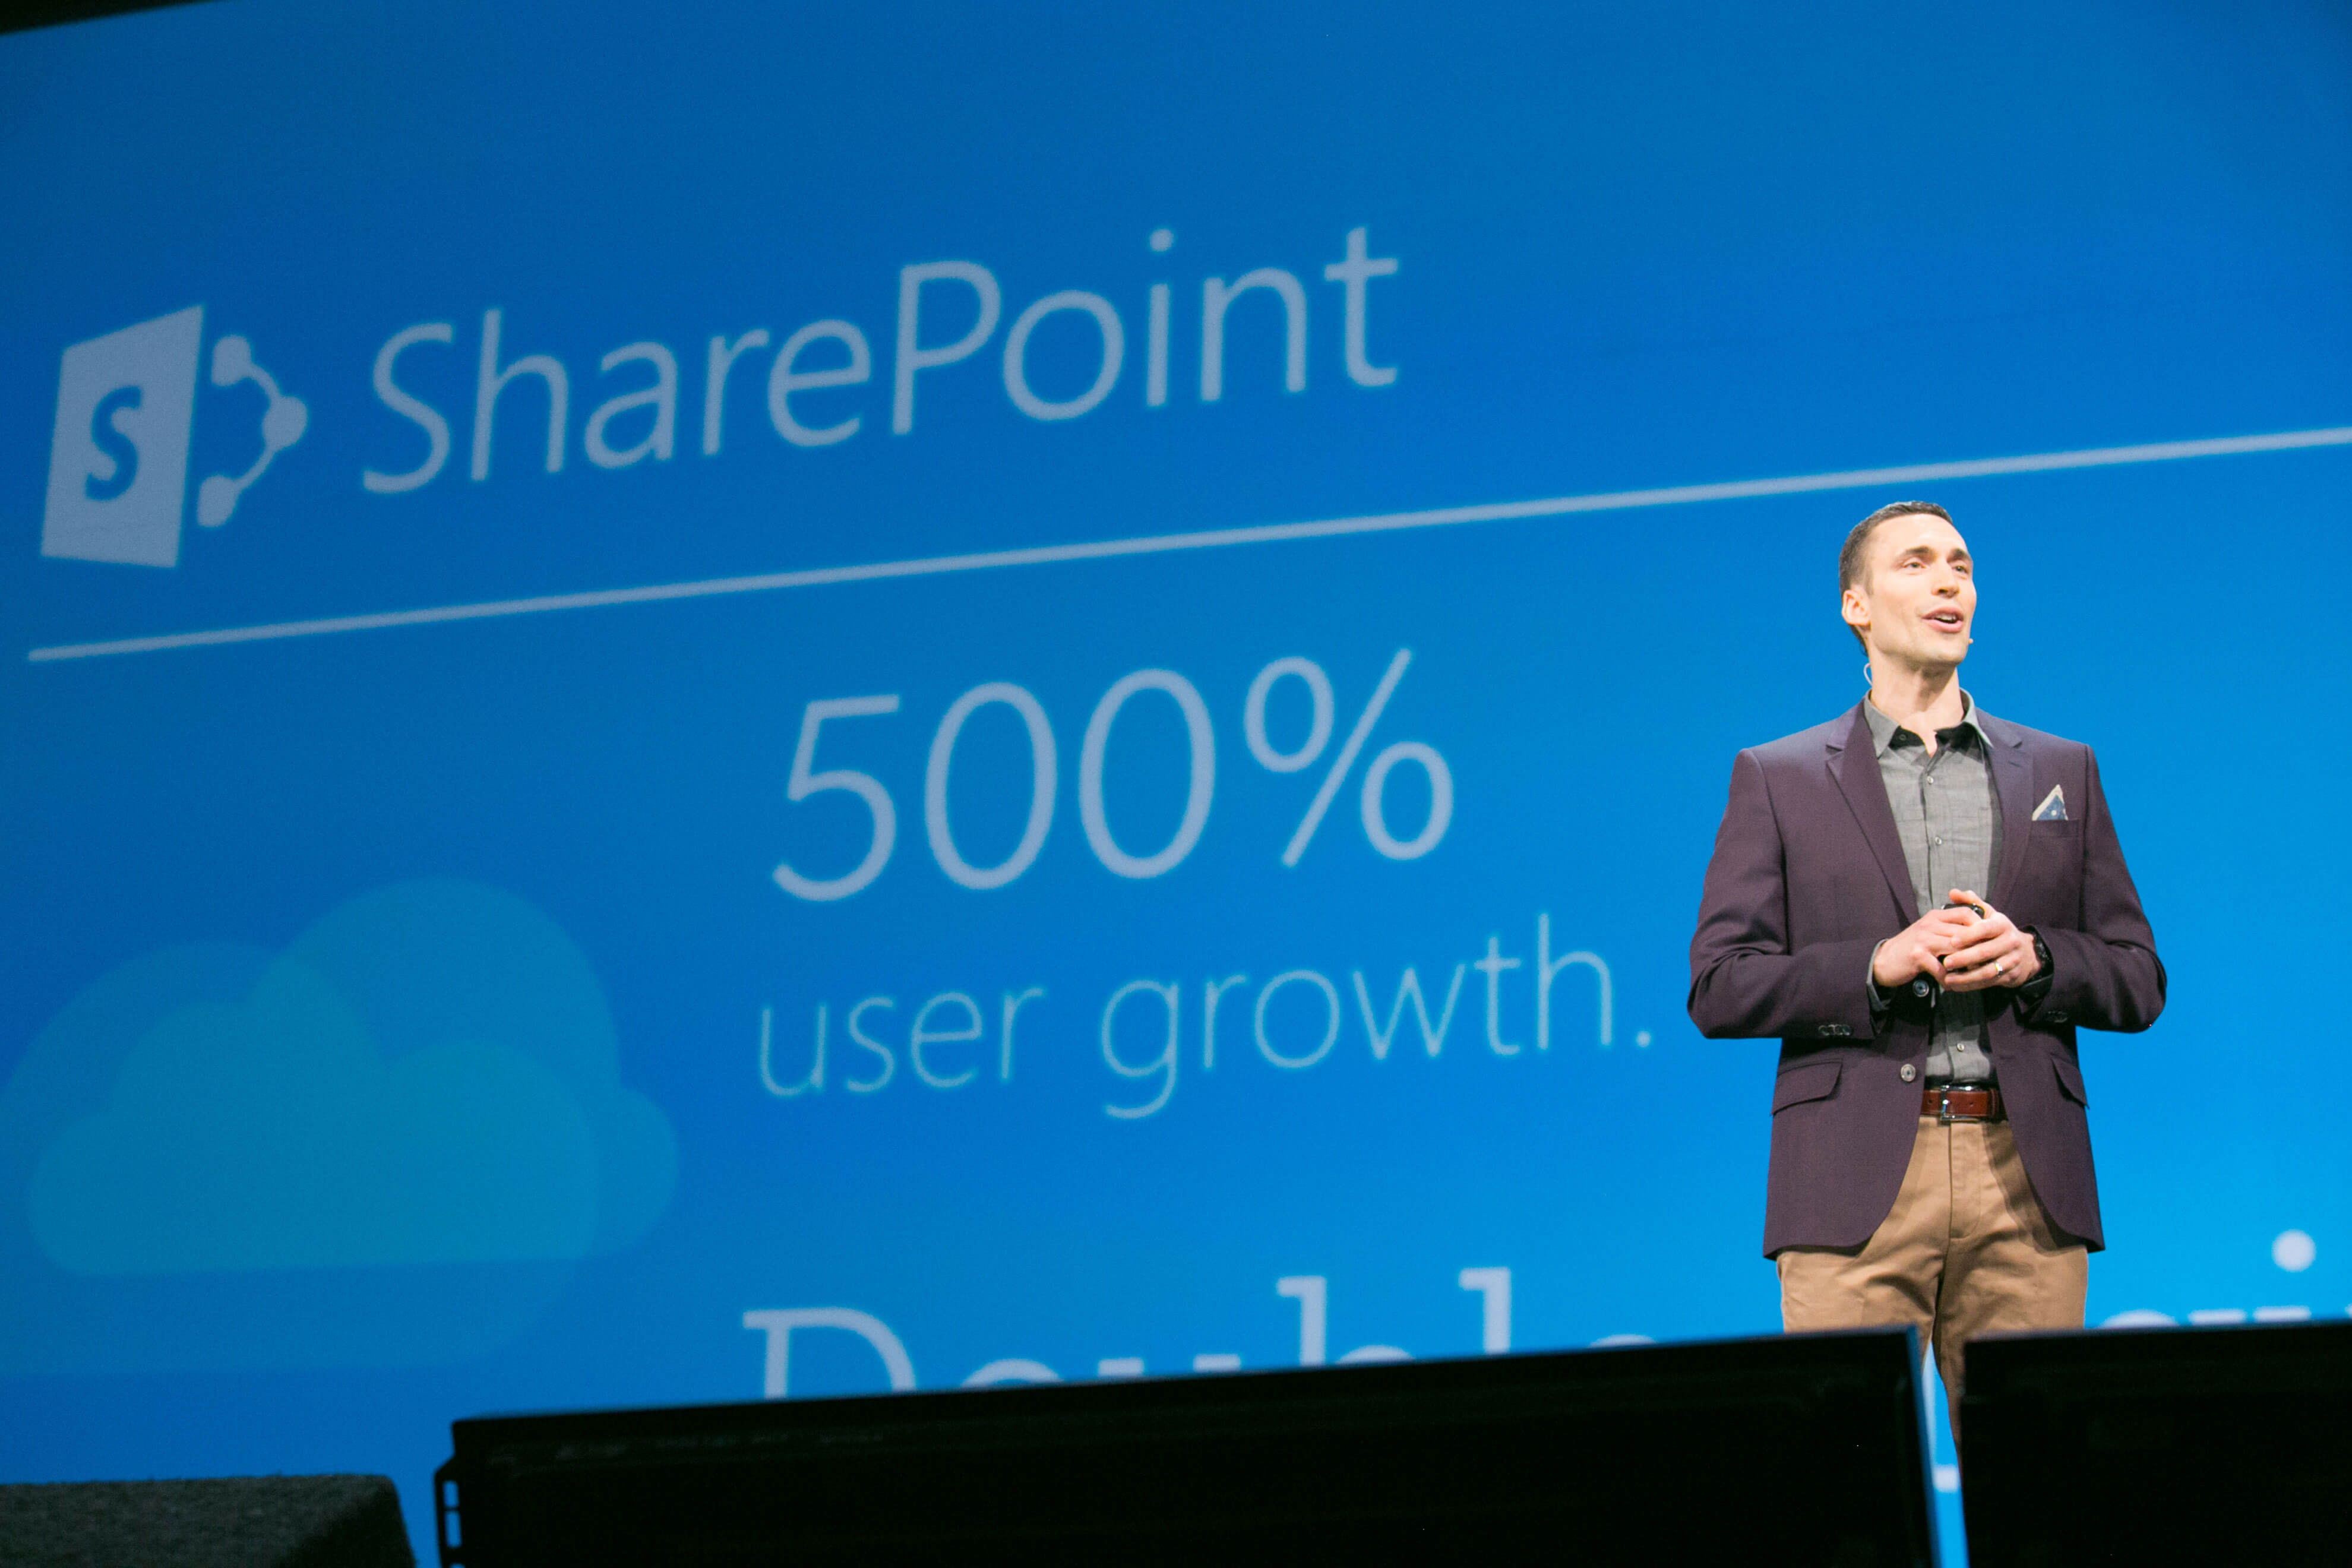 A message to the European SharePoint Community Direct from Jared Spataro, Live at SPC12 Las Vegas!